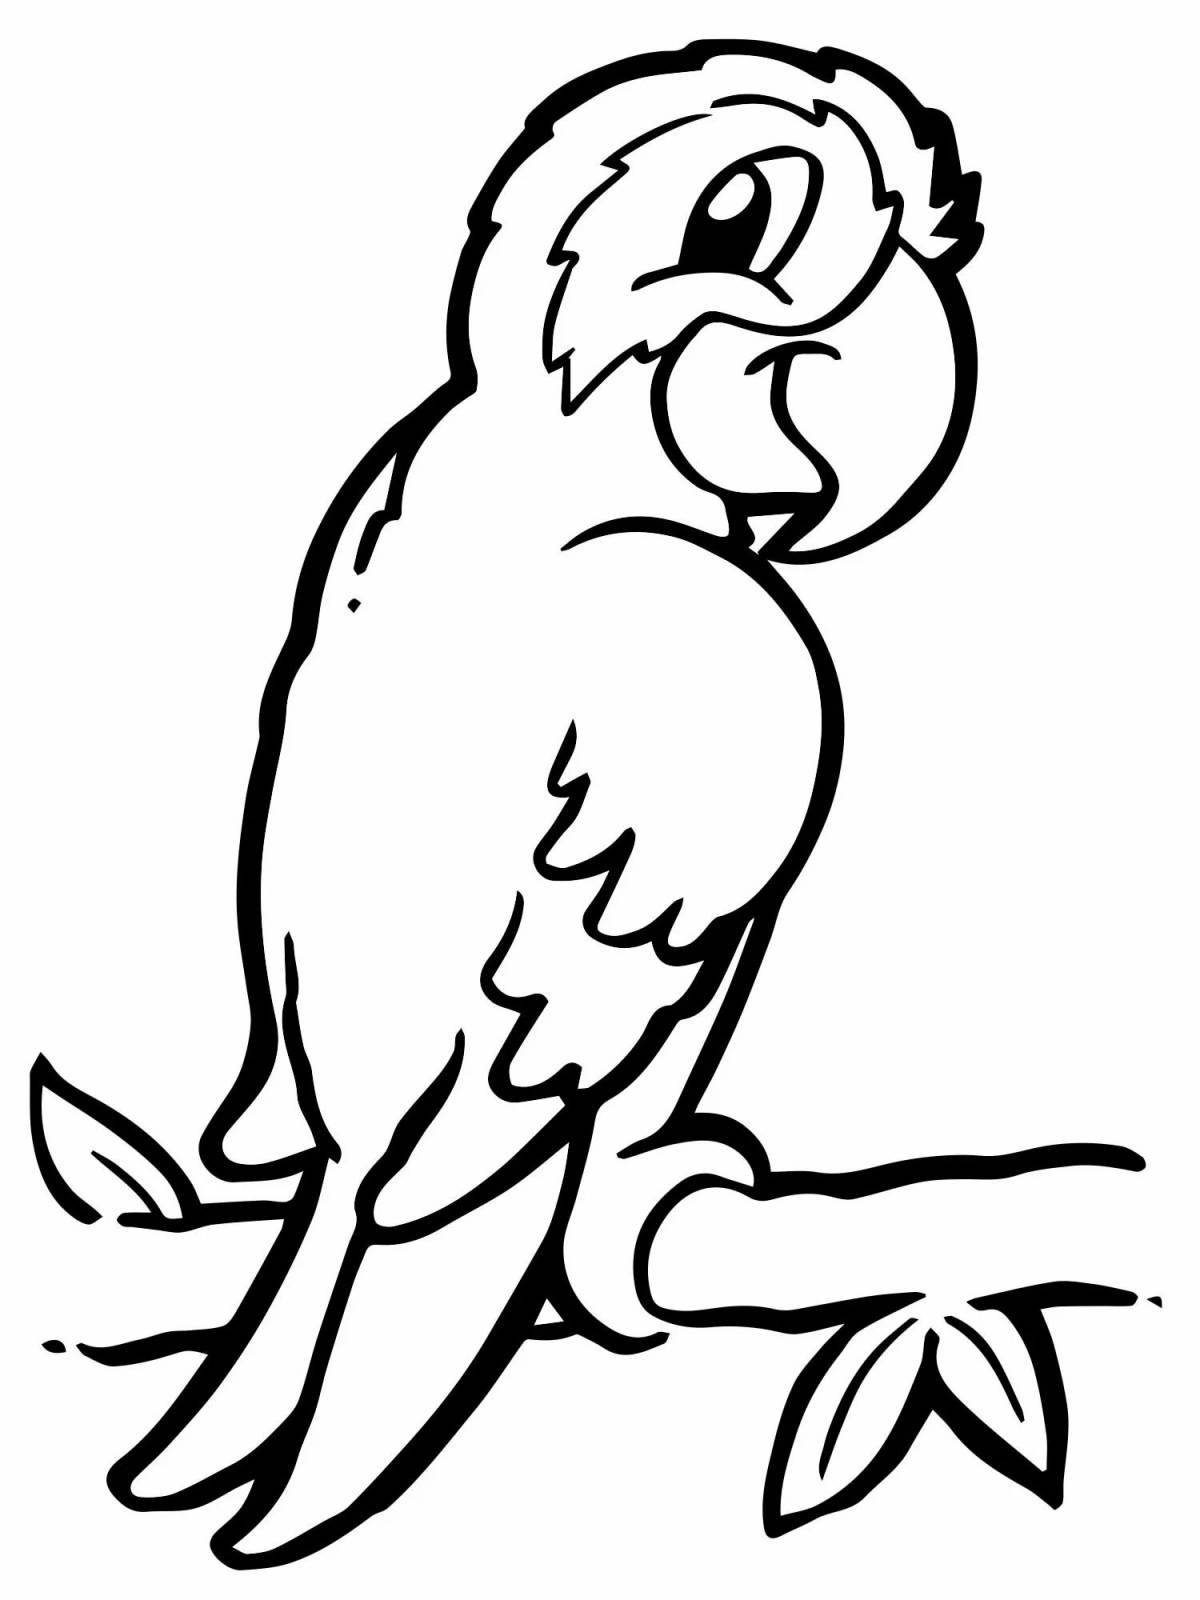 Bright drawing of a parrot for children